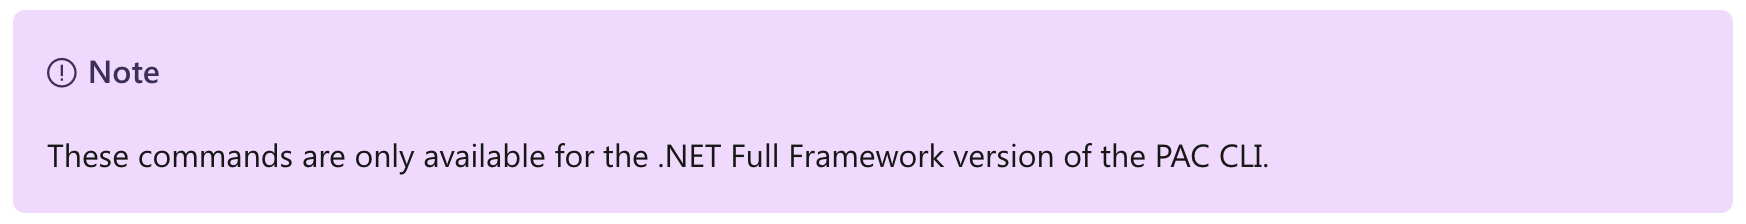 Note that states that a command is only available for the .NET Full Framework version of the PAC CLI